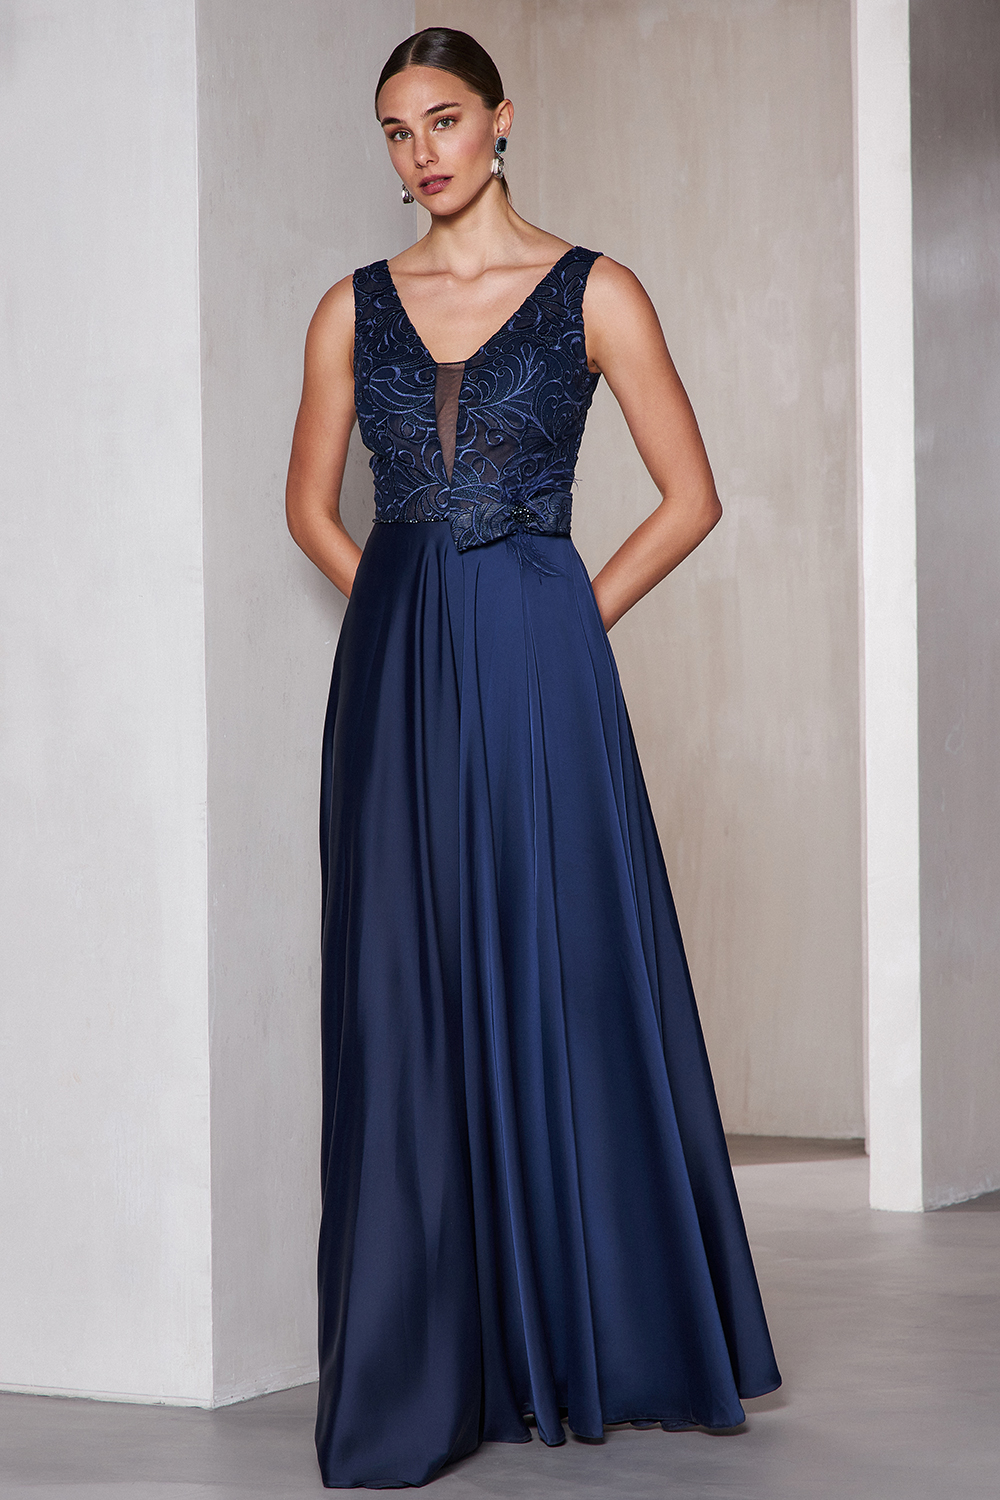 Evening Dresses / Long evening satin dress with lace top and bow at the waist